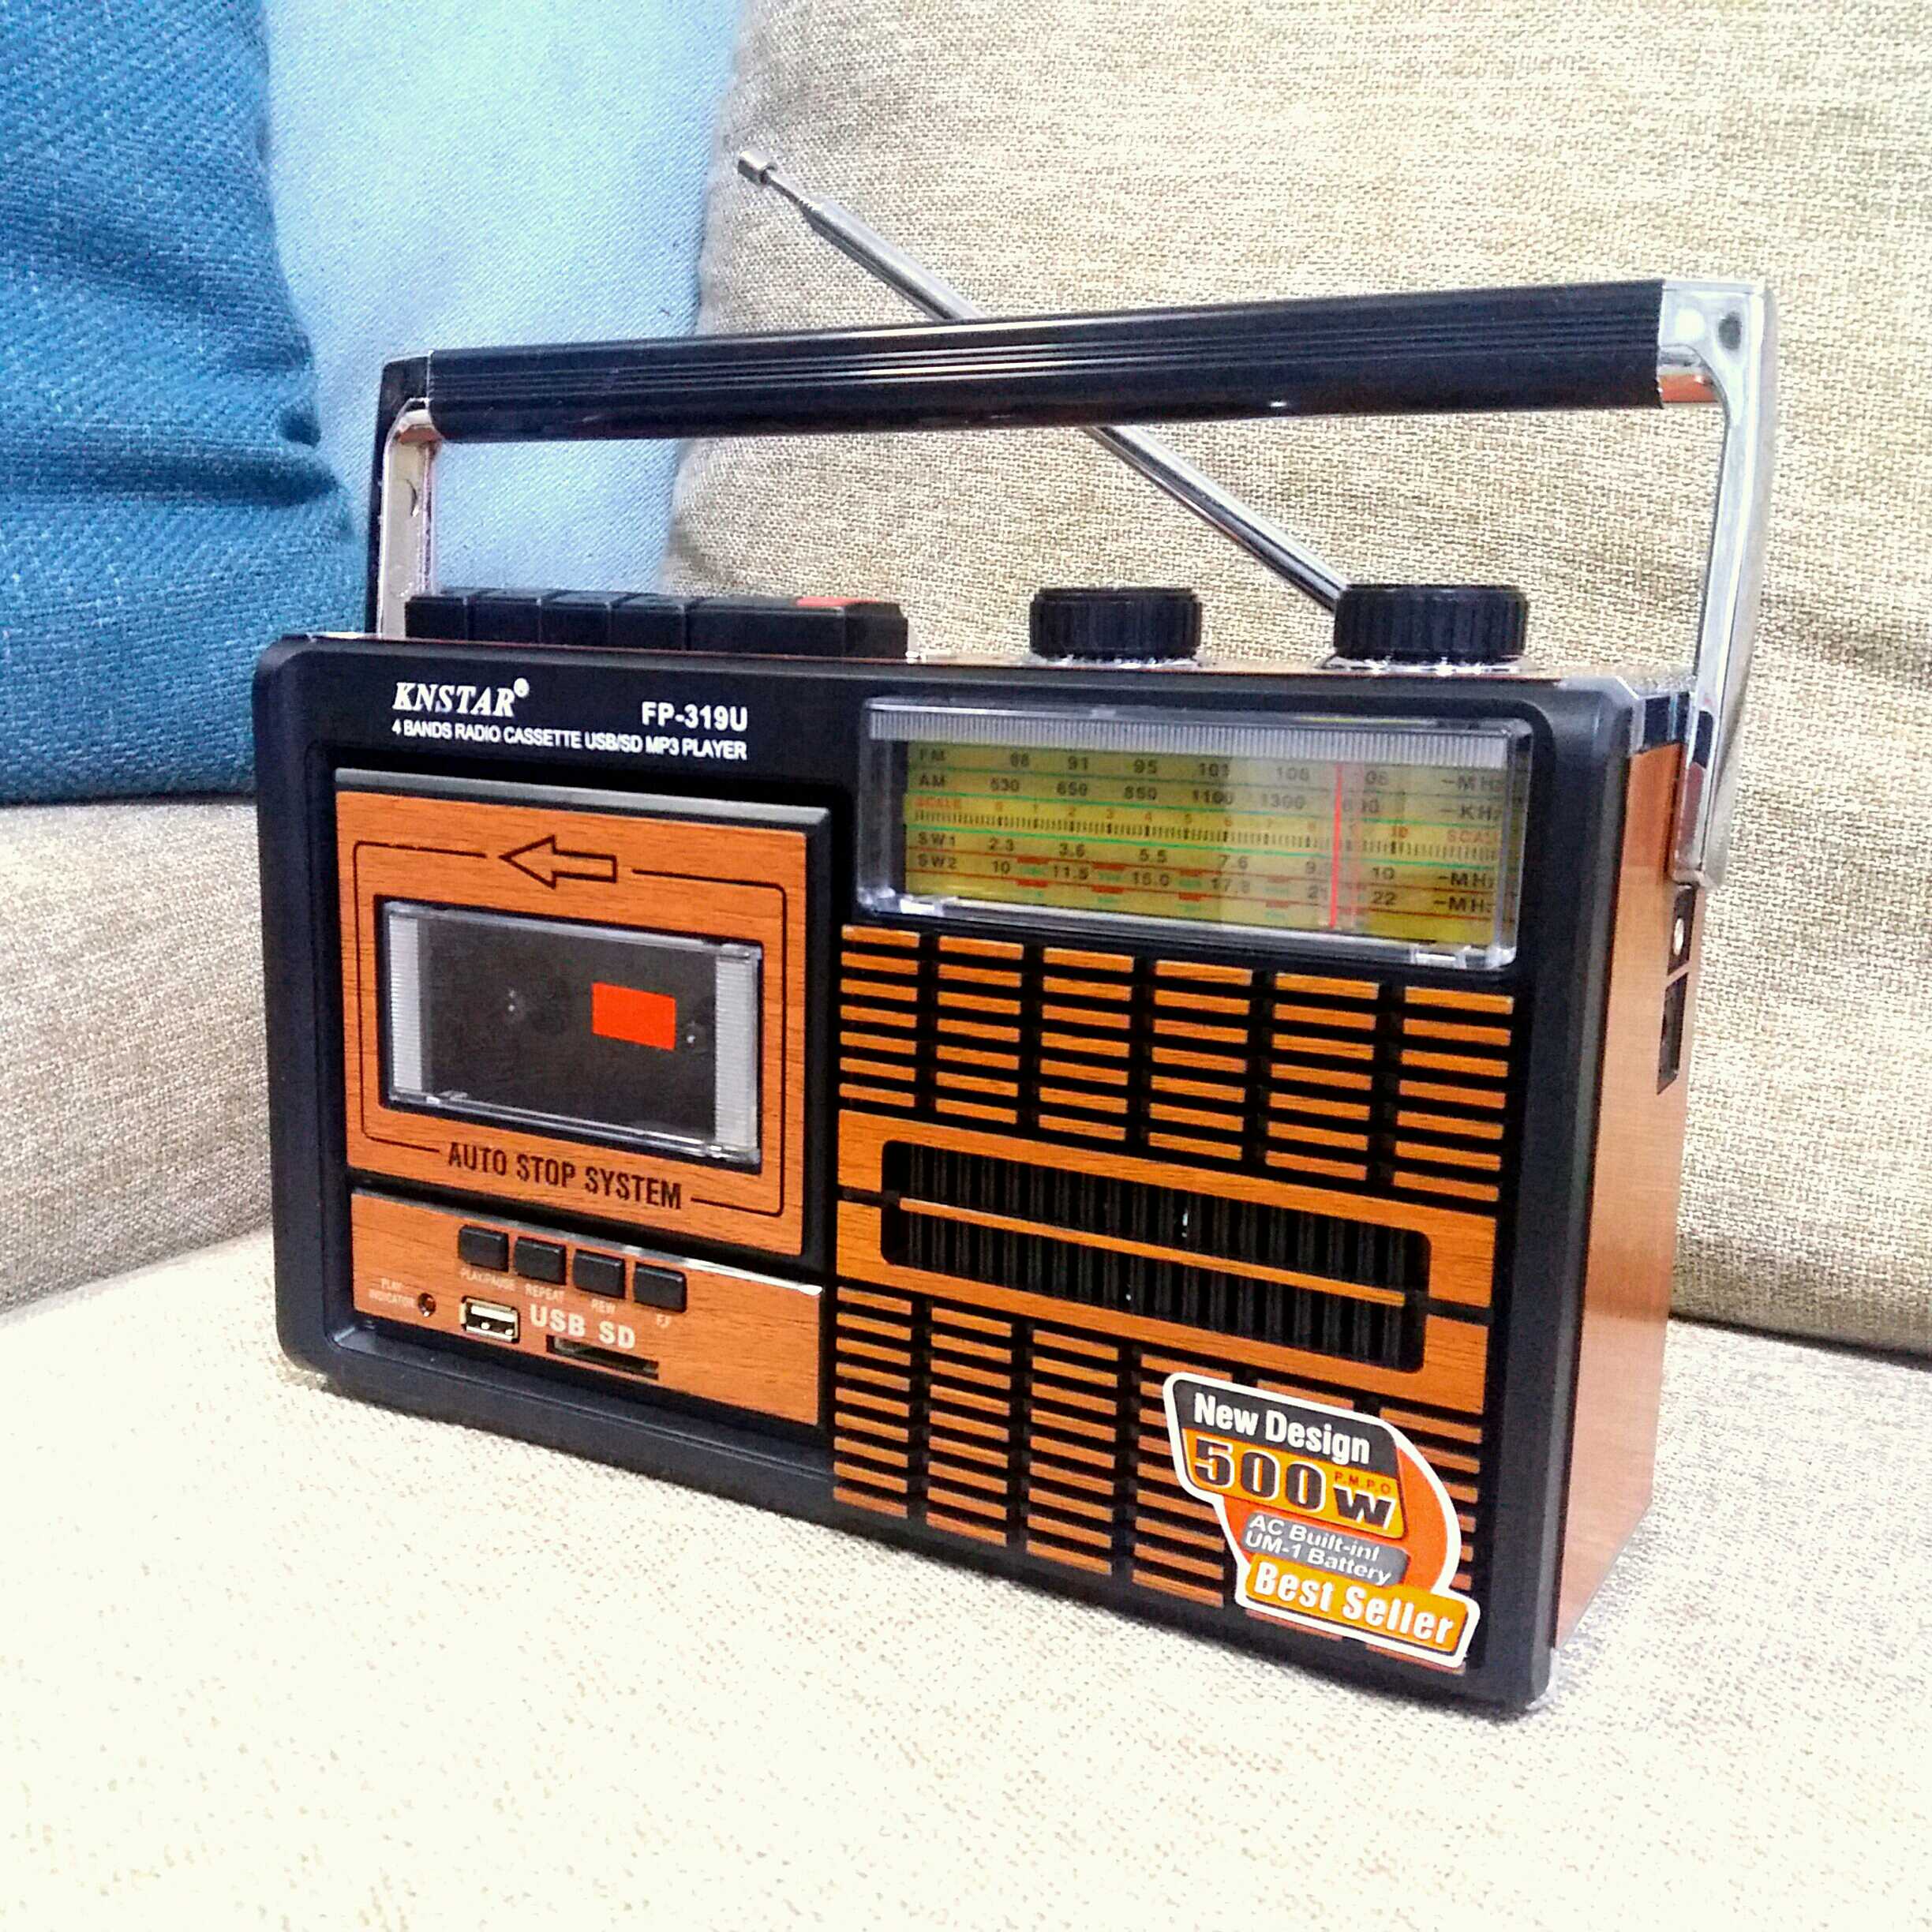 Foreign brand tape cassette player, cassette recorder, radio, old-fashioned retro single-player FM full wave